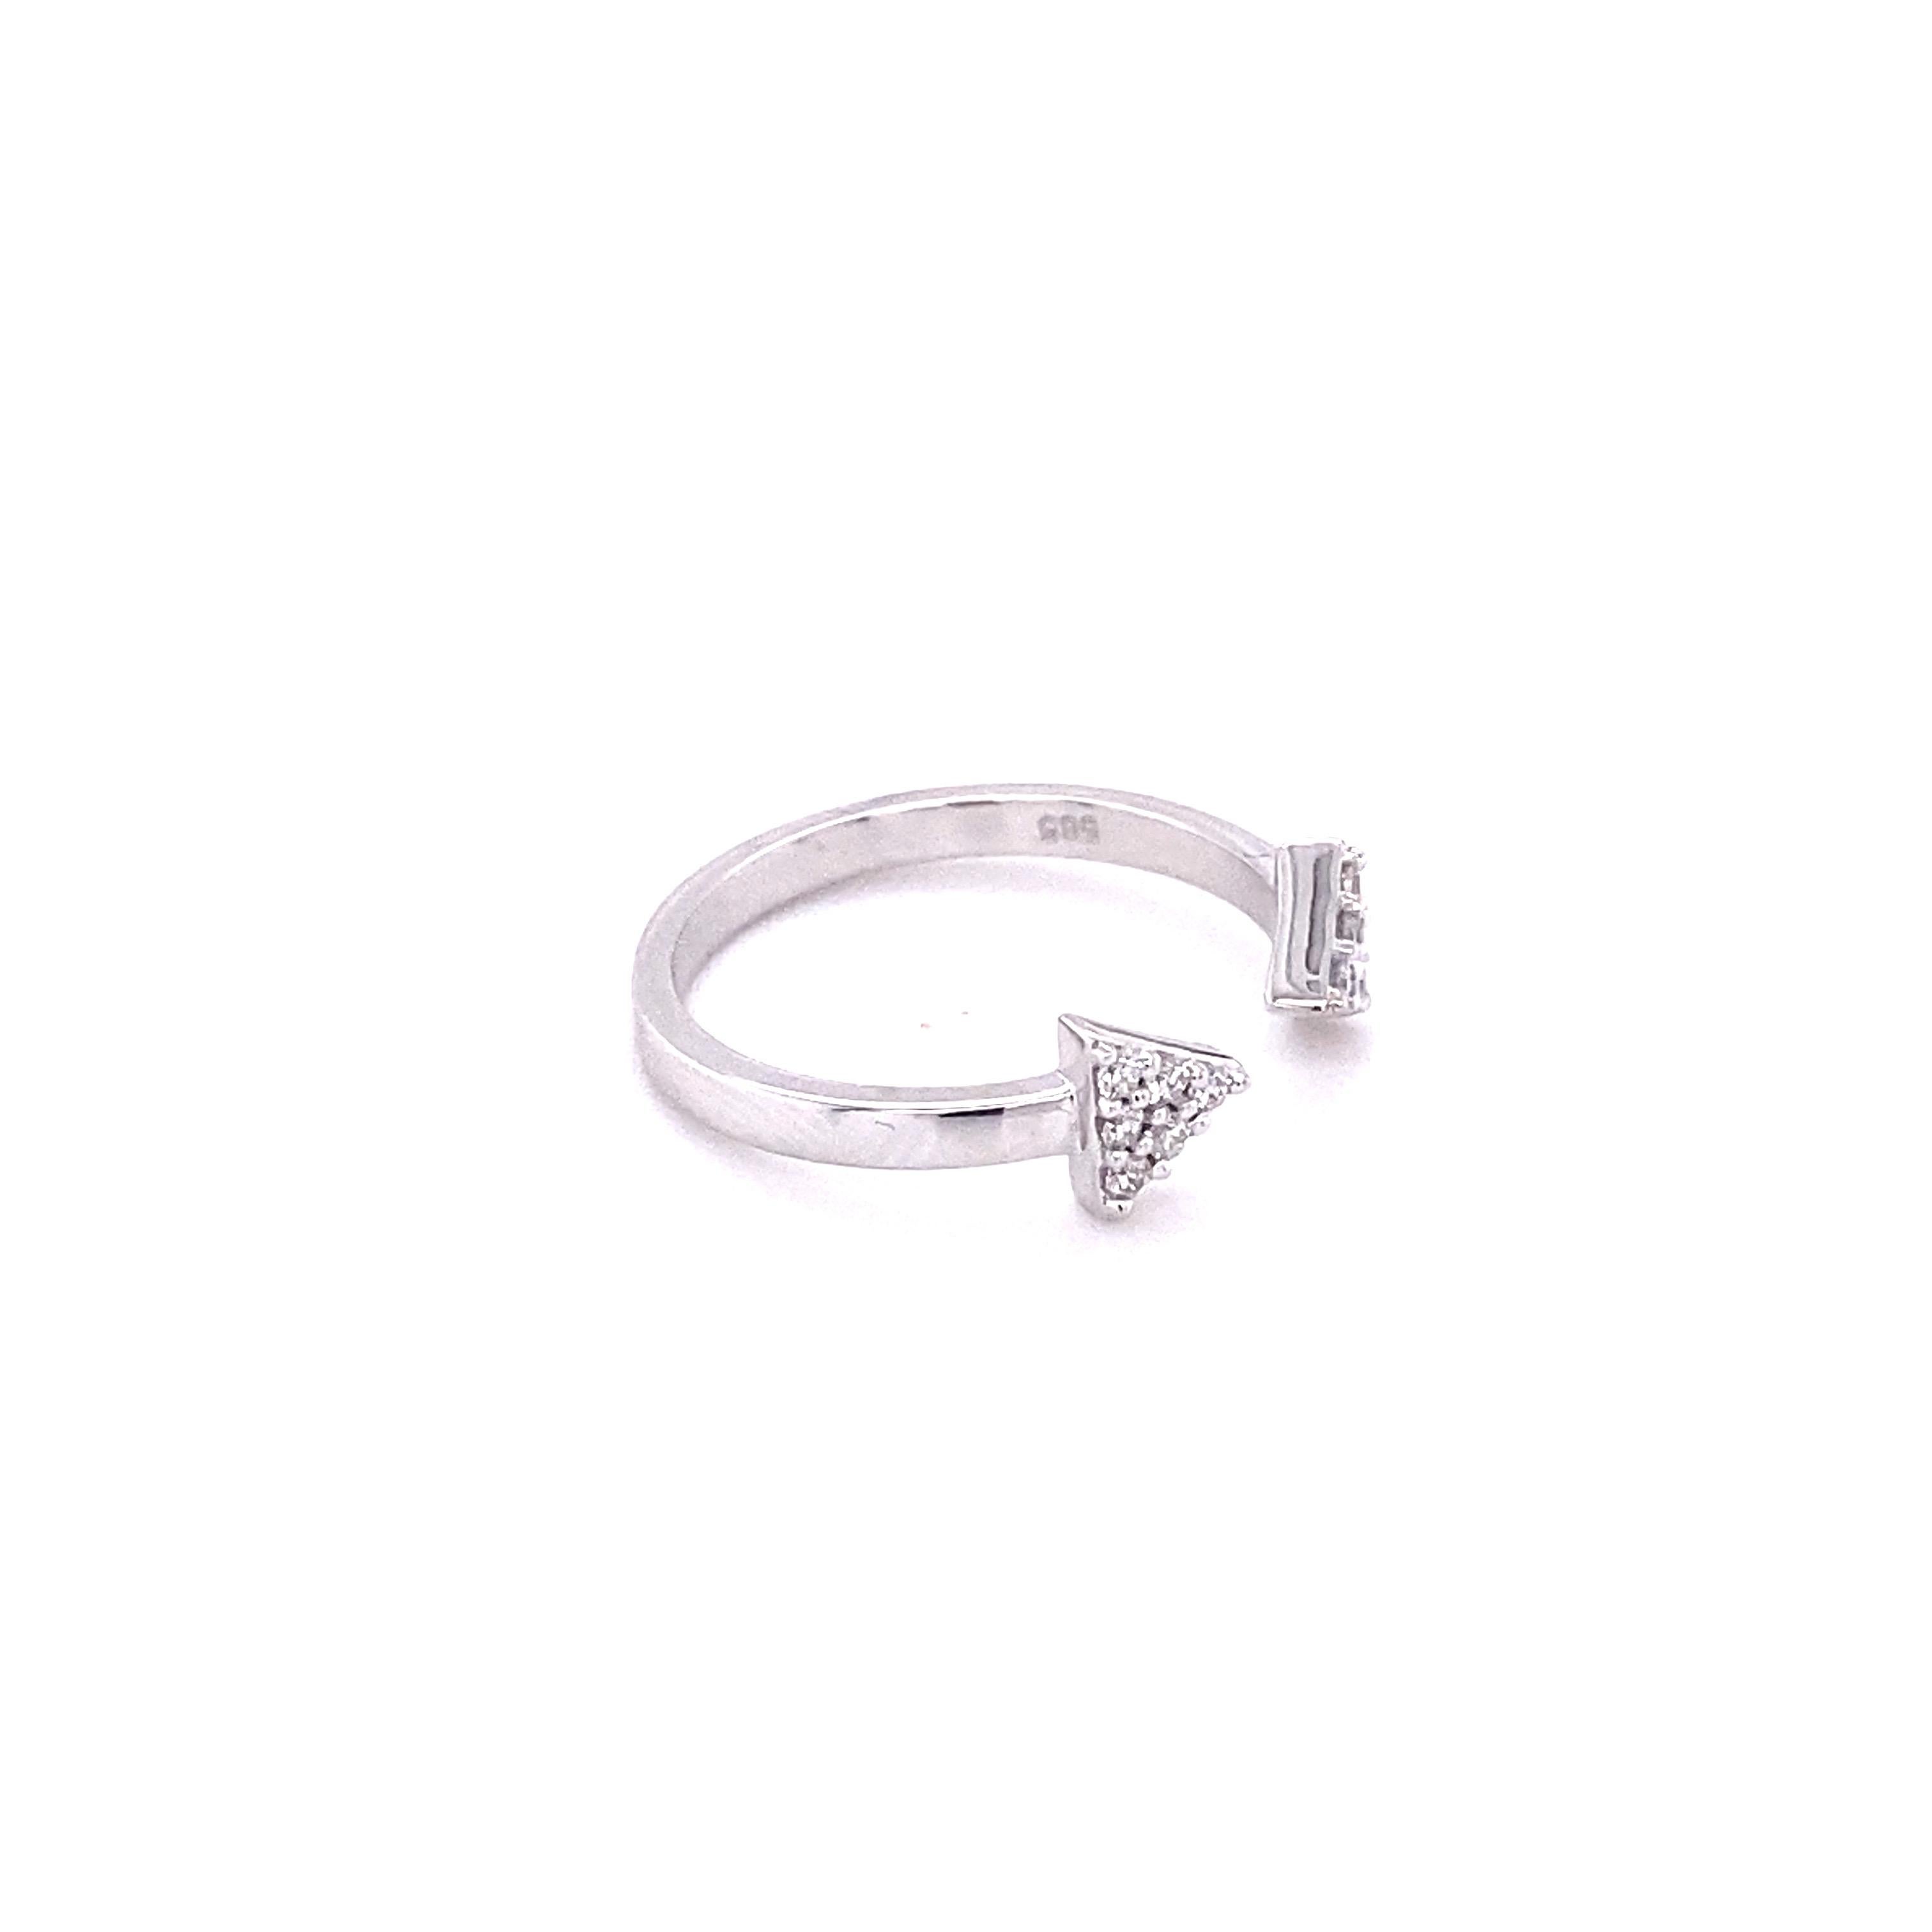 An arrow diamond ring for everyone! It is a split shank from the center, two arrows facing each other, and diamonds on both sides! The diamonds are only on the arrows, and the shank is a smooth 14k white gold! Perfect for fashion wear and for